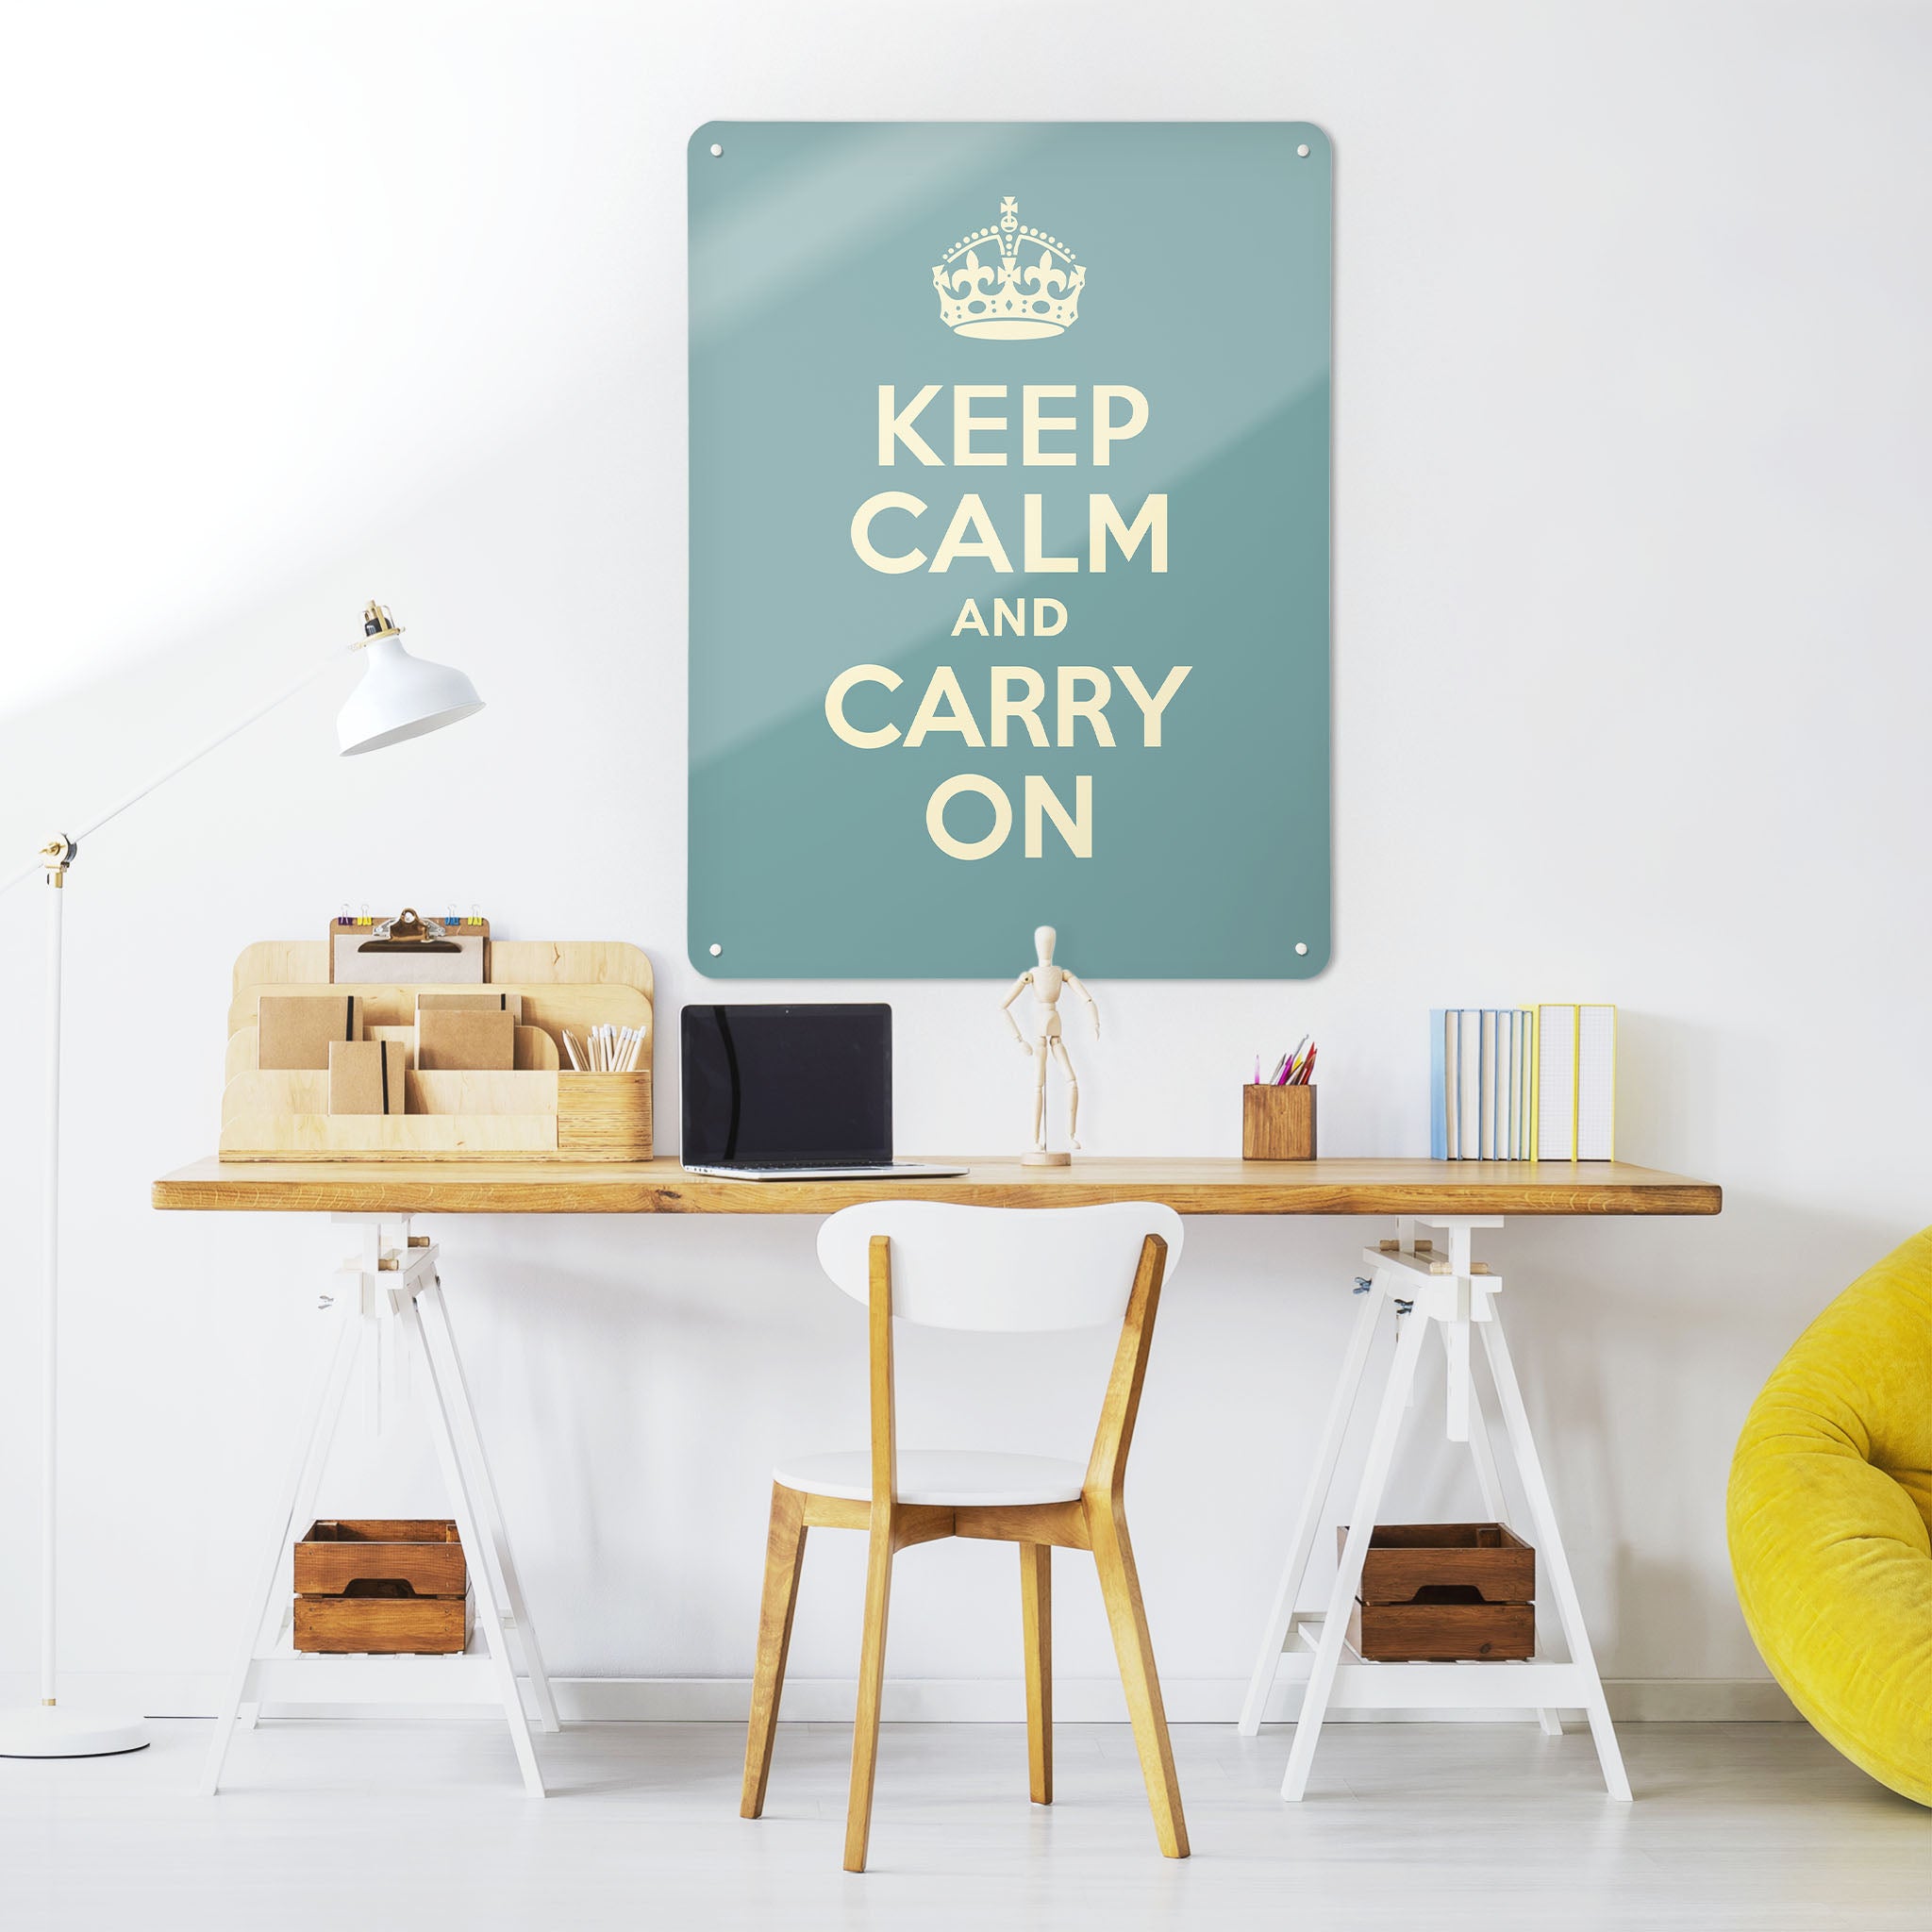 A desk in a workspace setting in a white interior with a magnetic metal wall art panel showing a vintage keep calm and carry on poster in blue